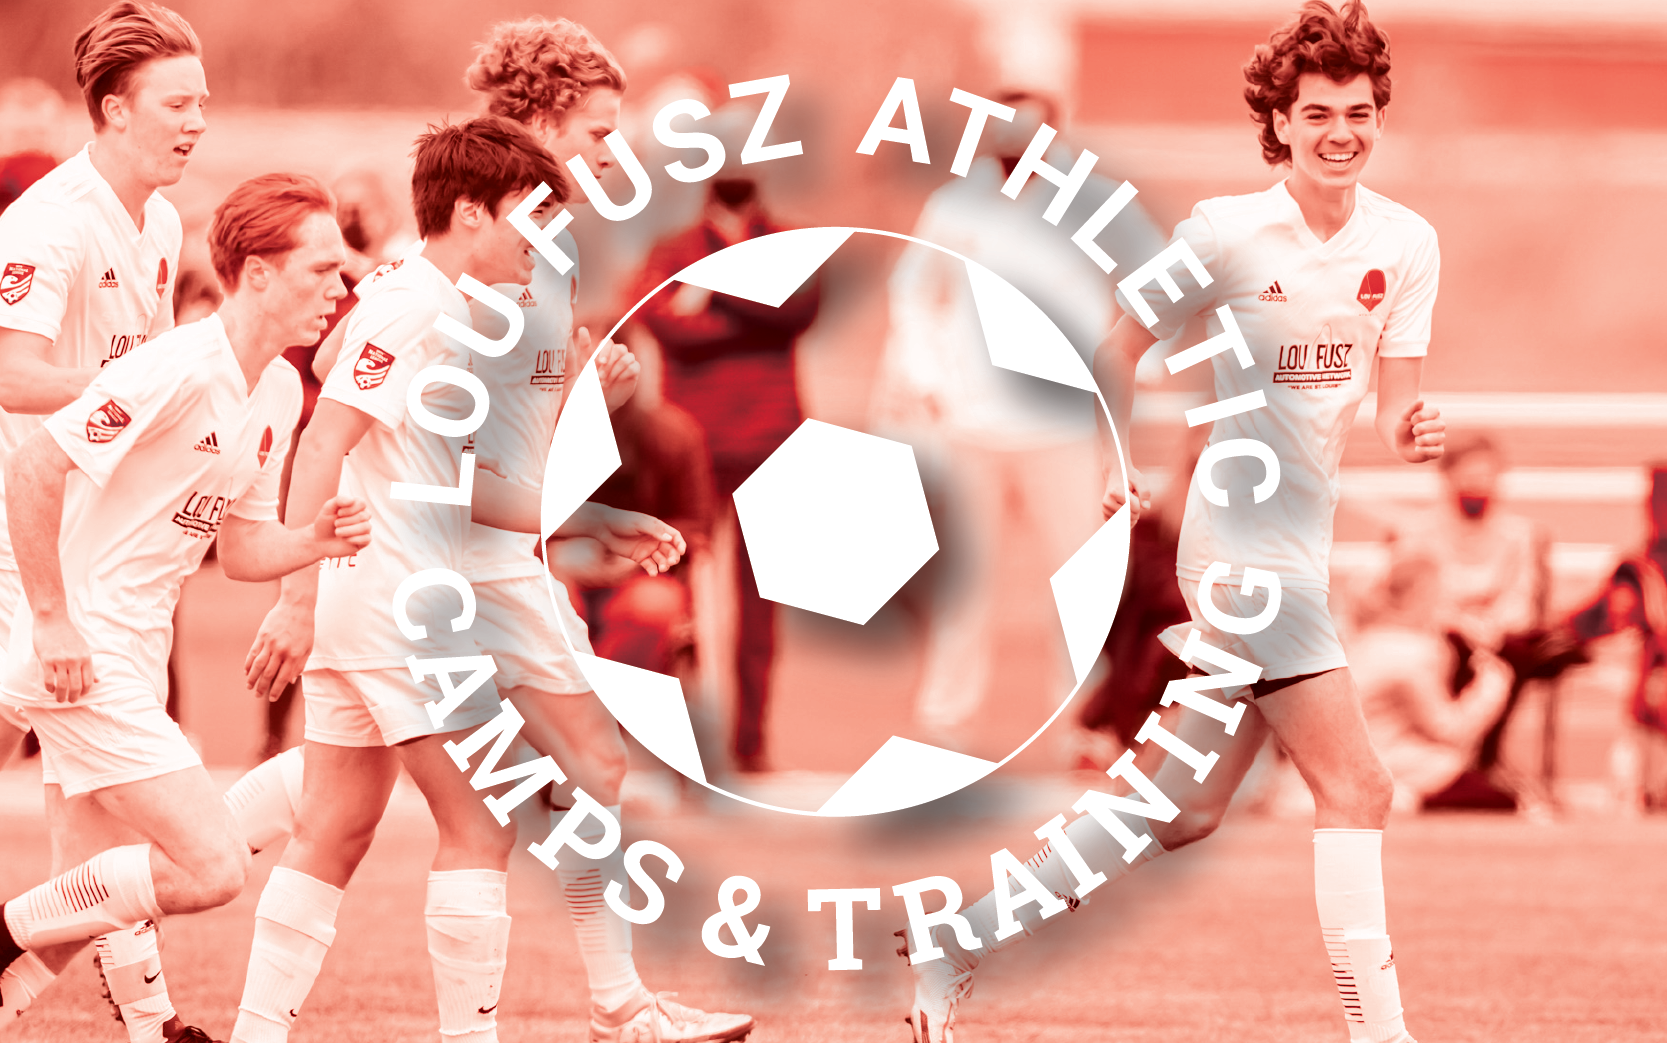 Lou Fusz Athletics camps and training